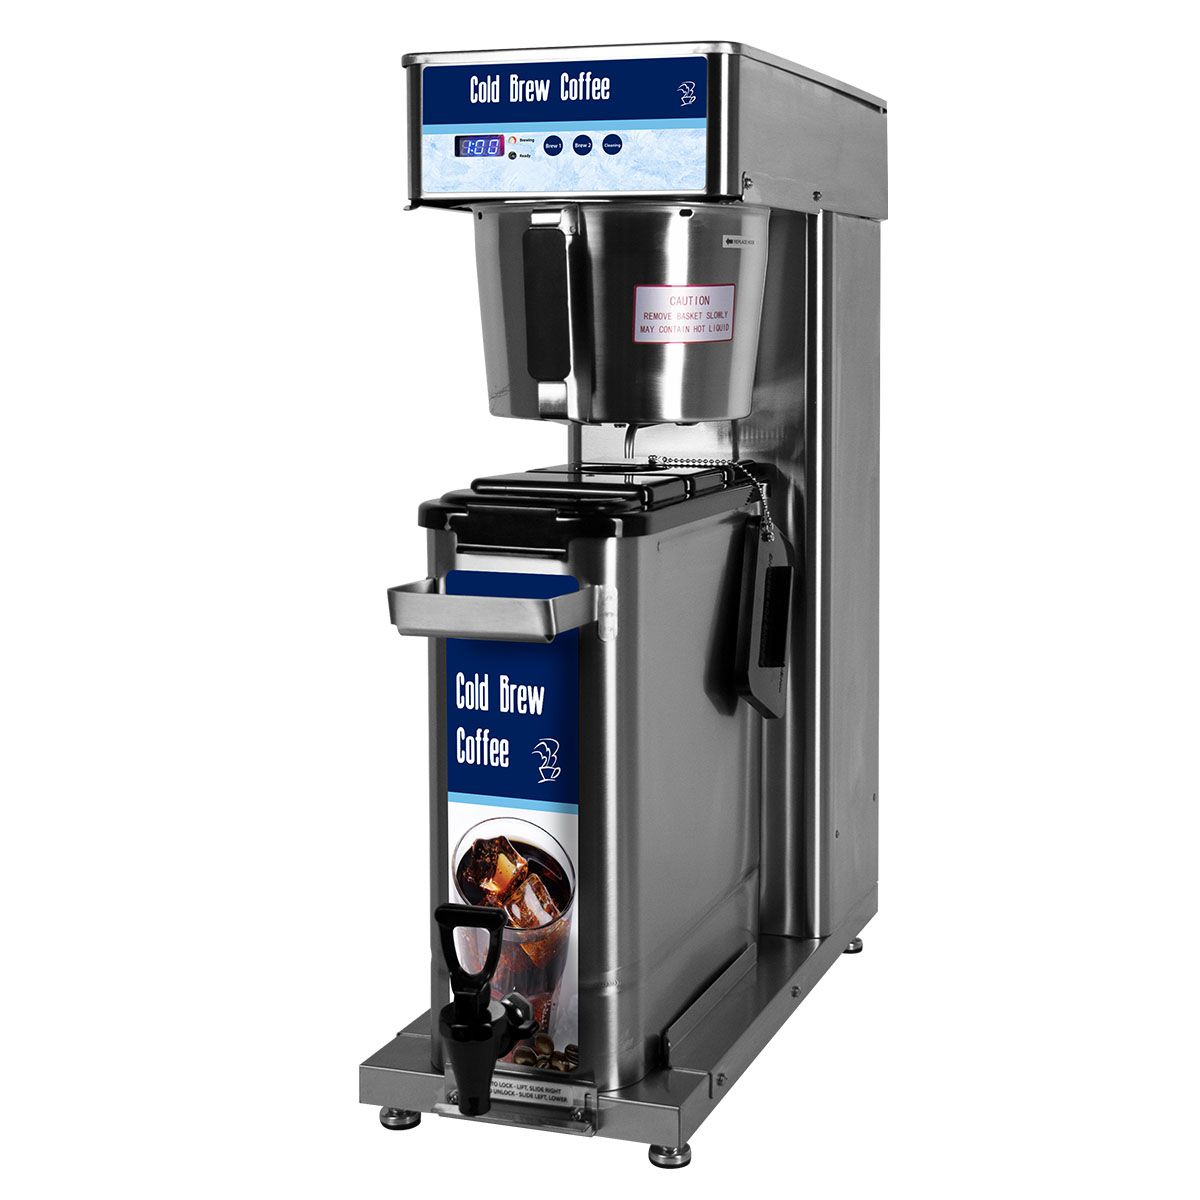 https://www.newcocoffee.com/wp-content/uploads/2022/04/ColdBrew_Dispenser_Angle.jpg